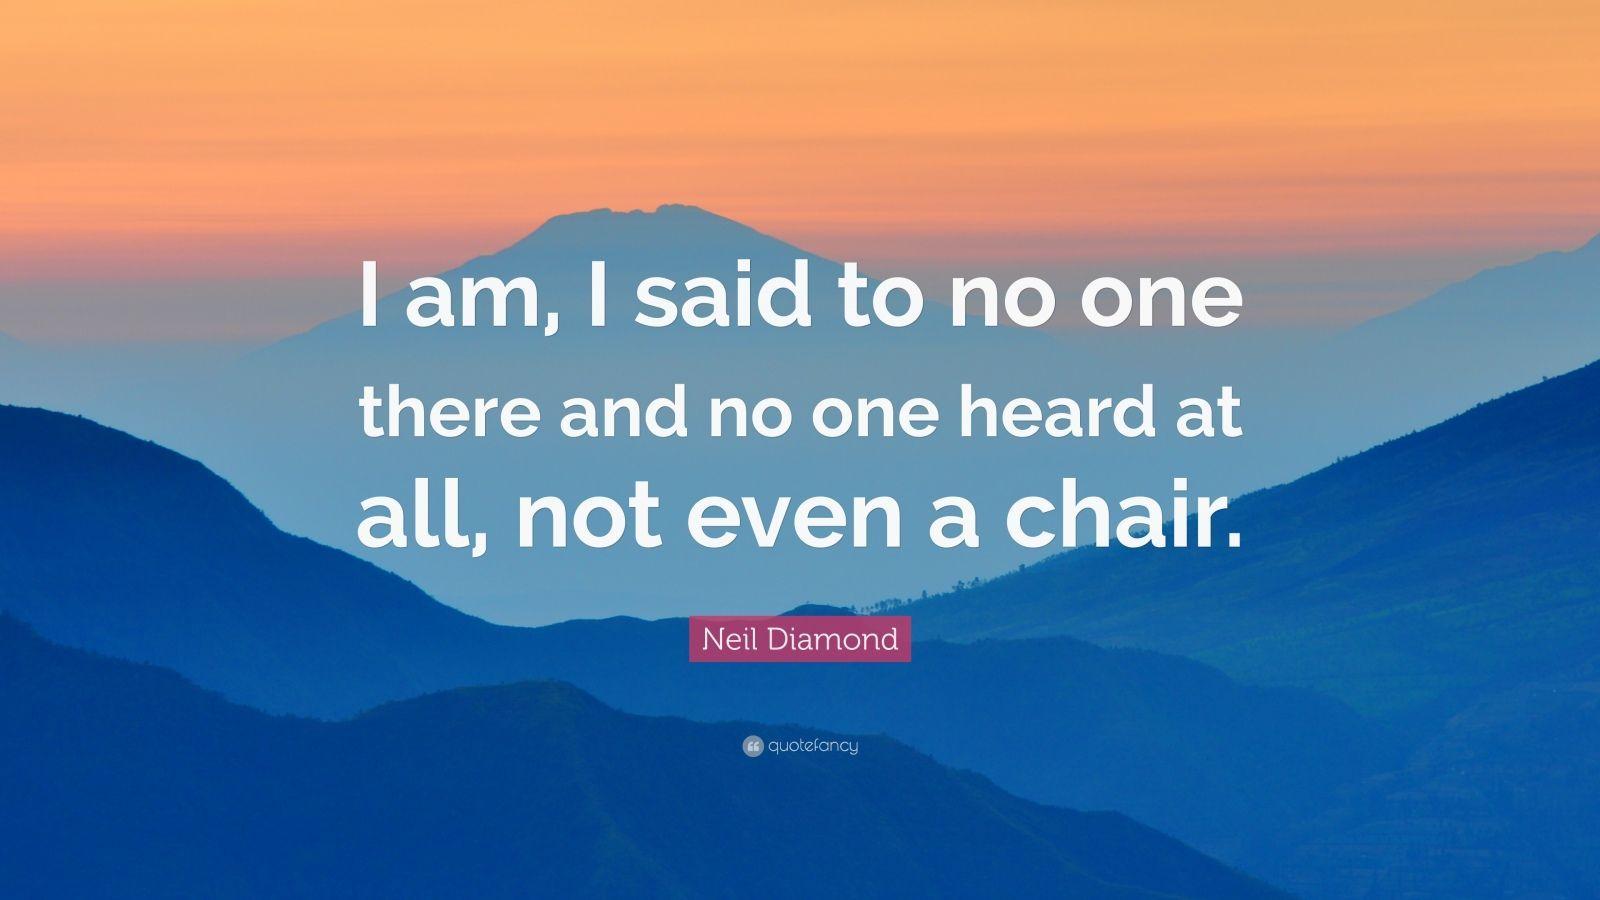 Neil Diamond Quote: “I am, I said to no one there and no one heard